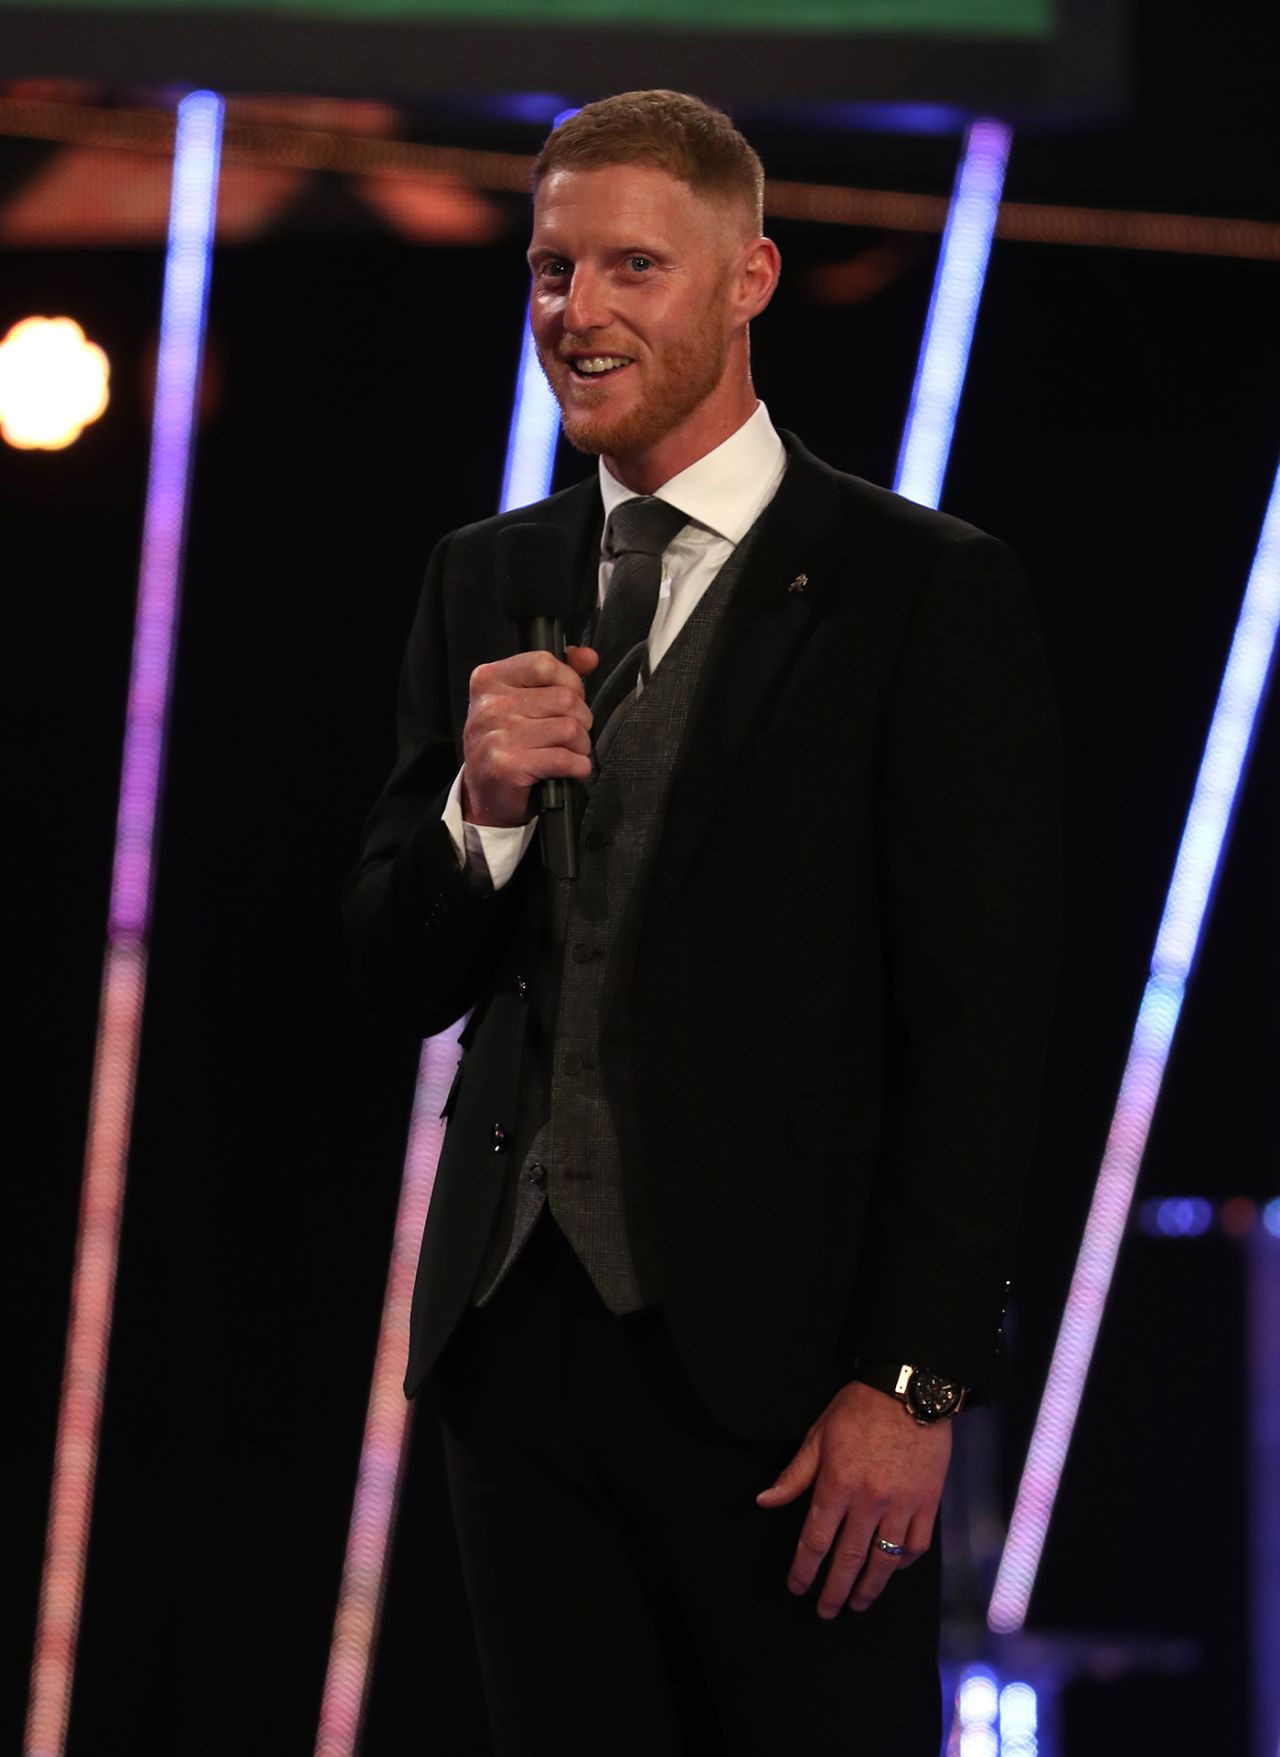 Ben Stokes on stage at the BBC's Sports Personality of the Year awards